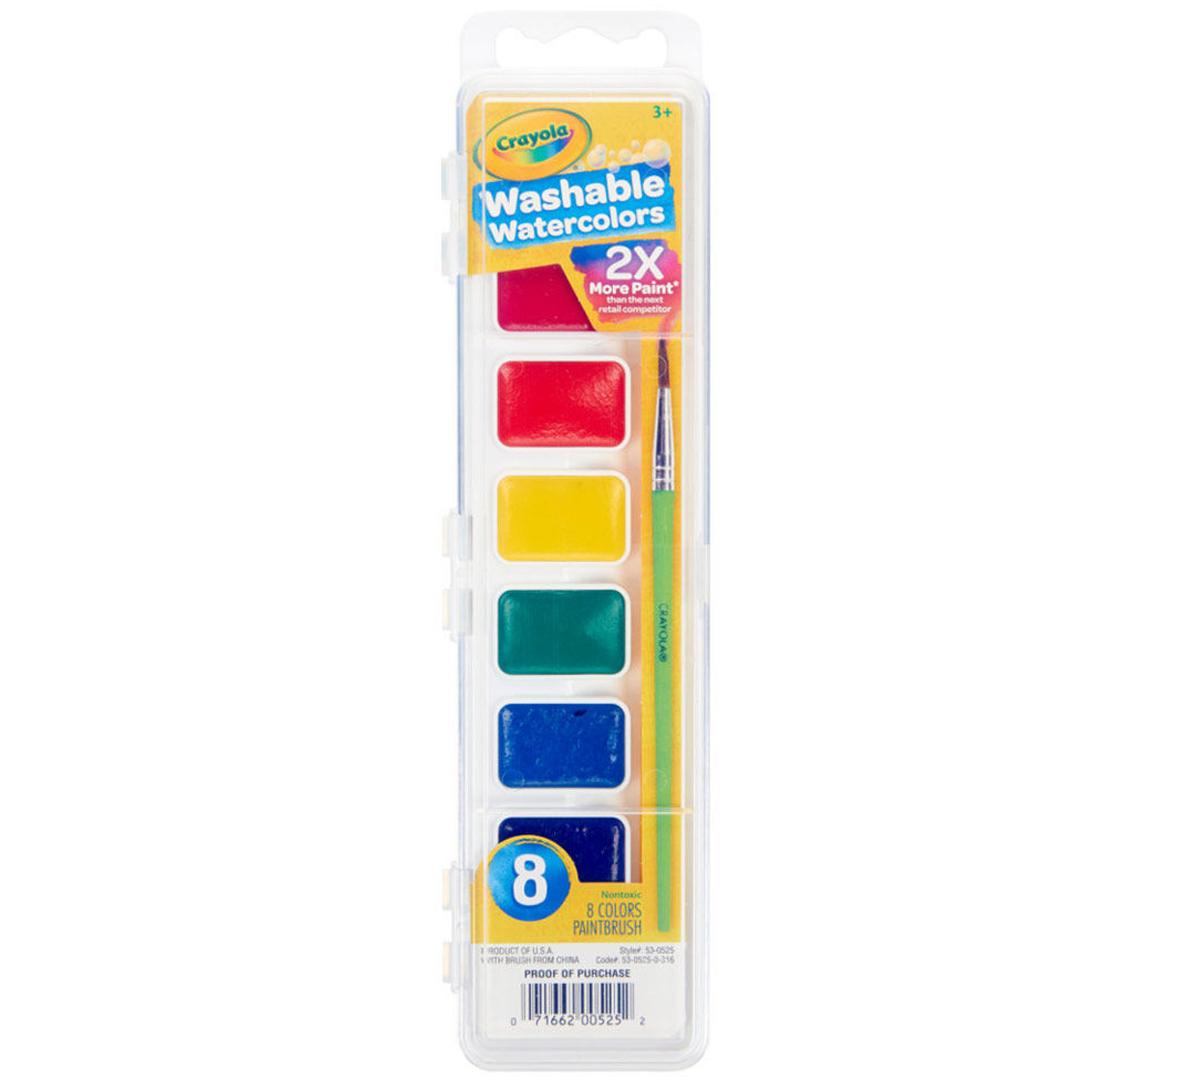 Package of Crayola 8-Color Washable Watercolors